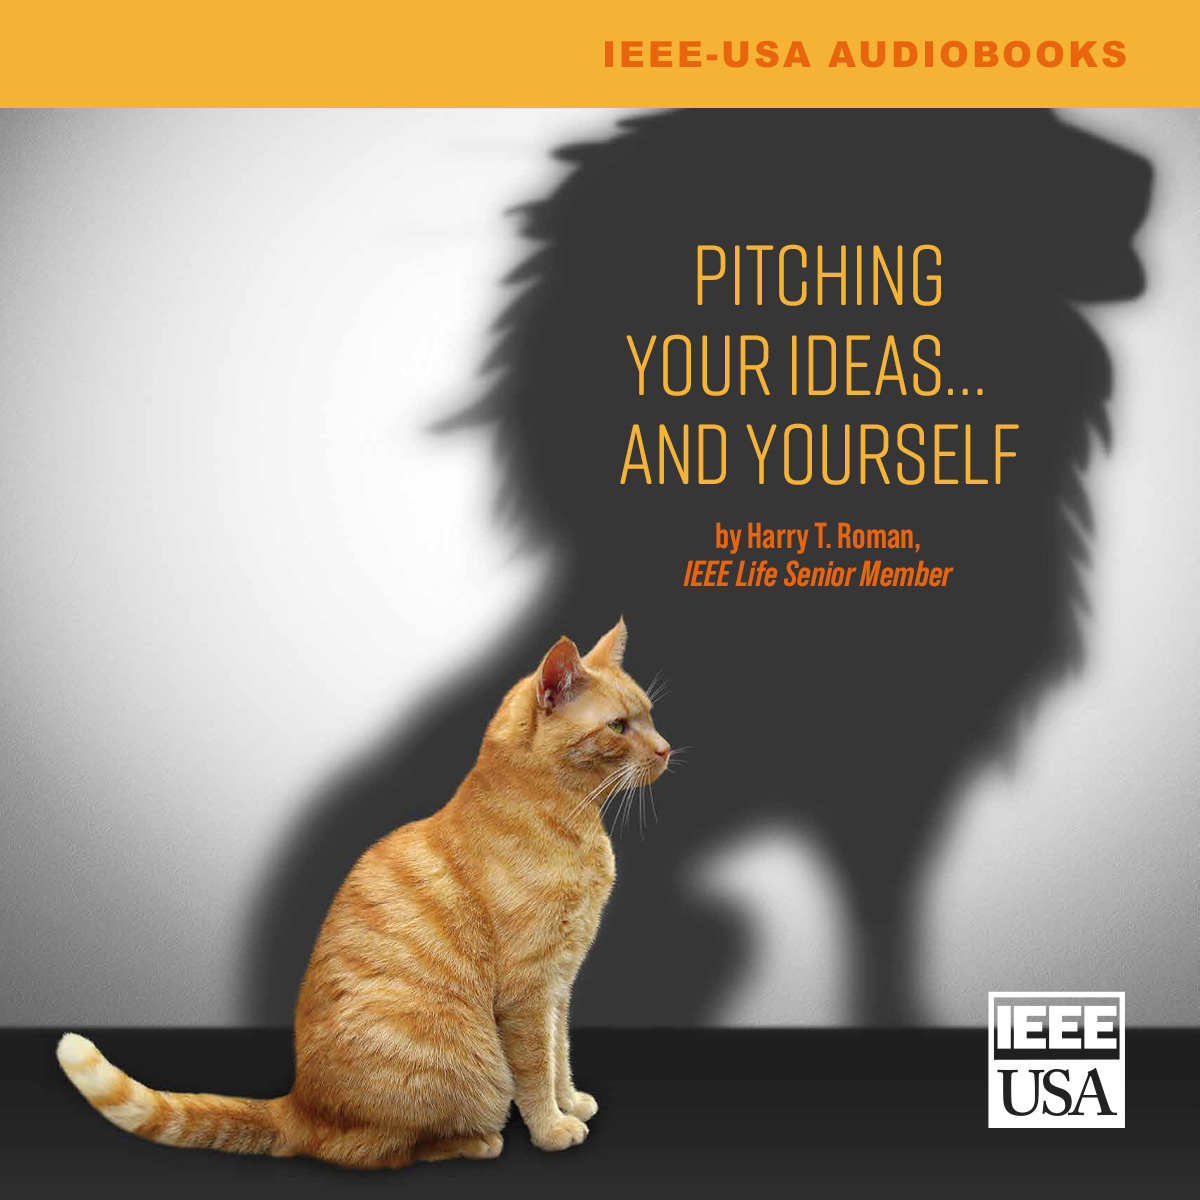 Audiobook: Pitching Your Ideas and Yourself